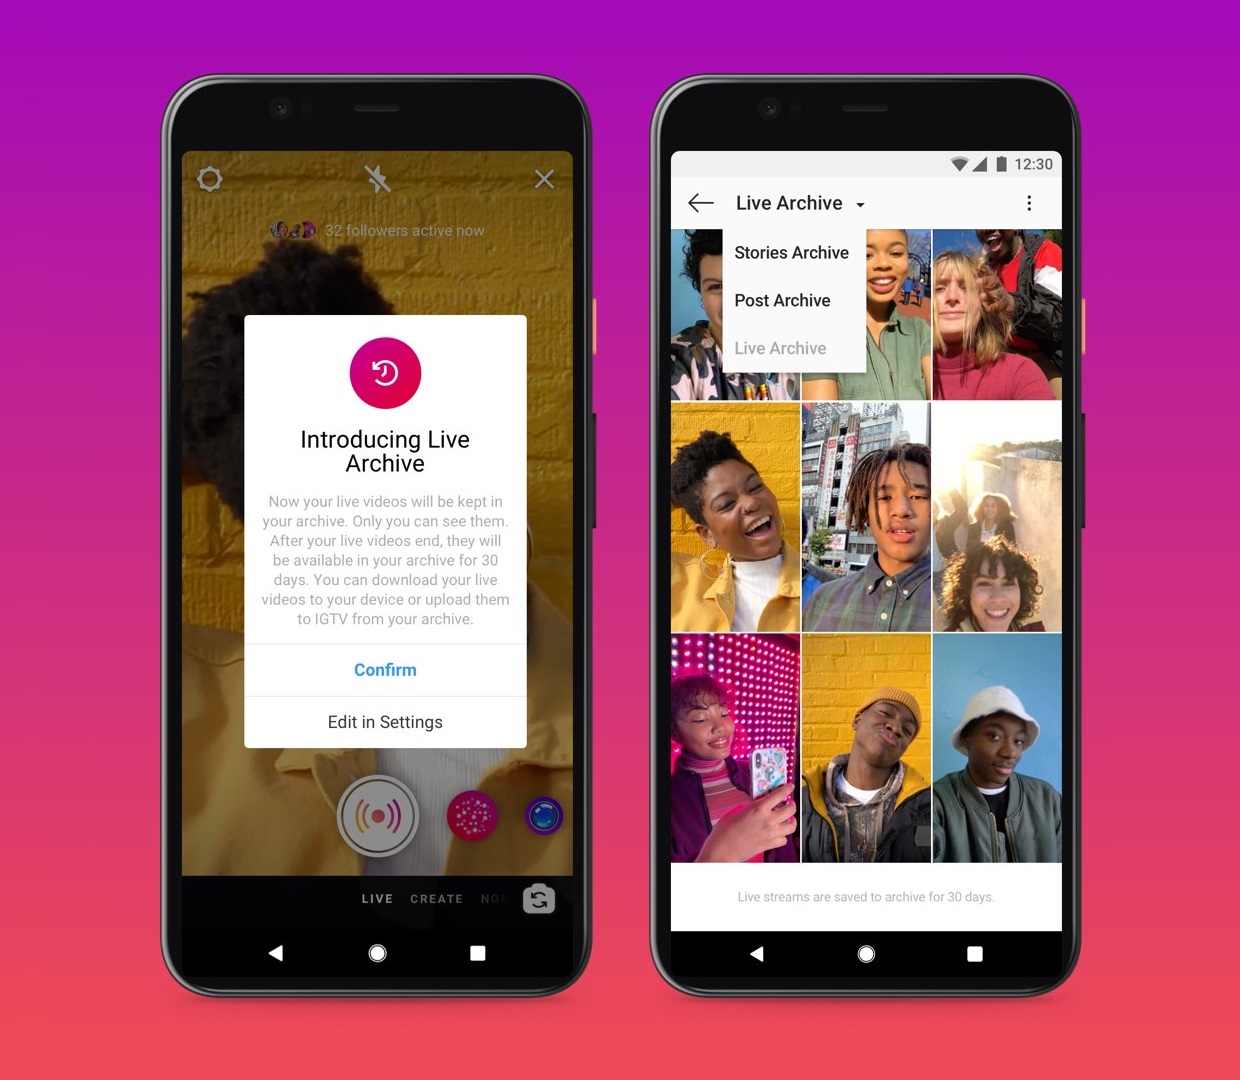 Instagram adds two new feathers in the IG Live streaming hat, including an extension in the streams time length and a new archiving option